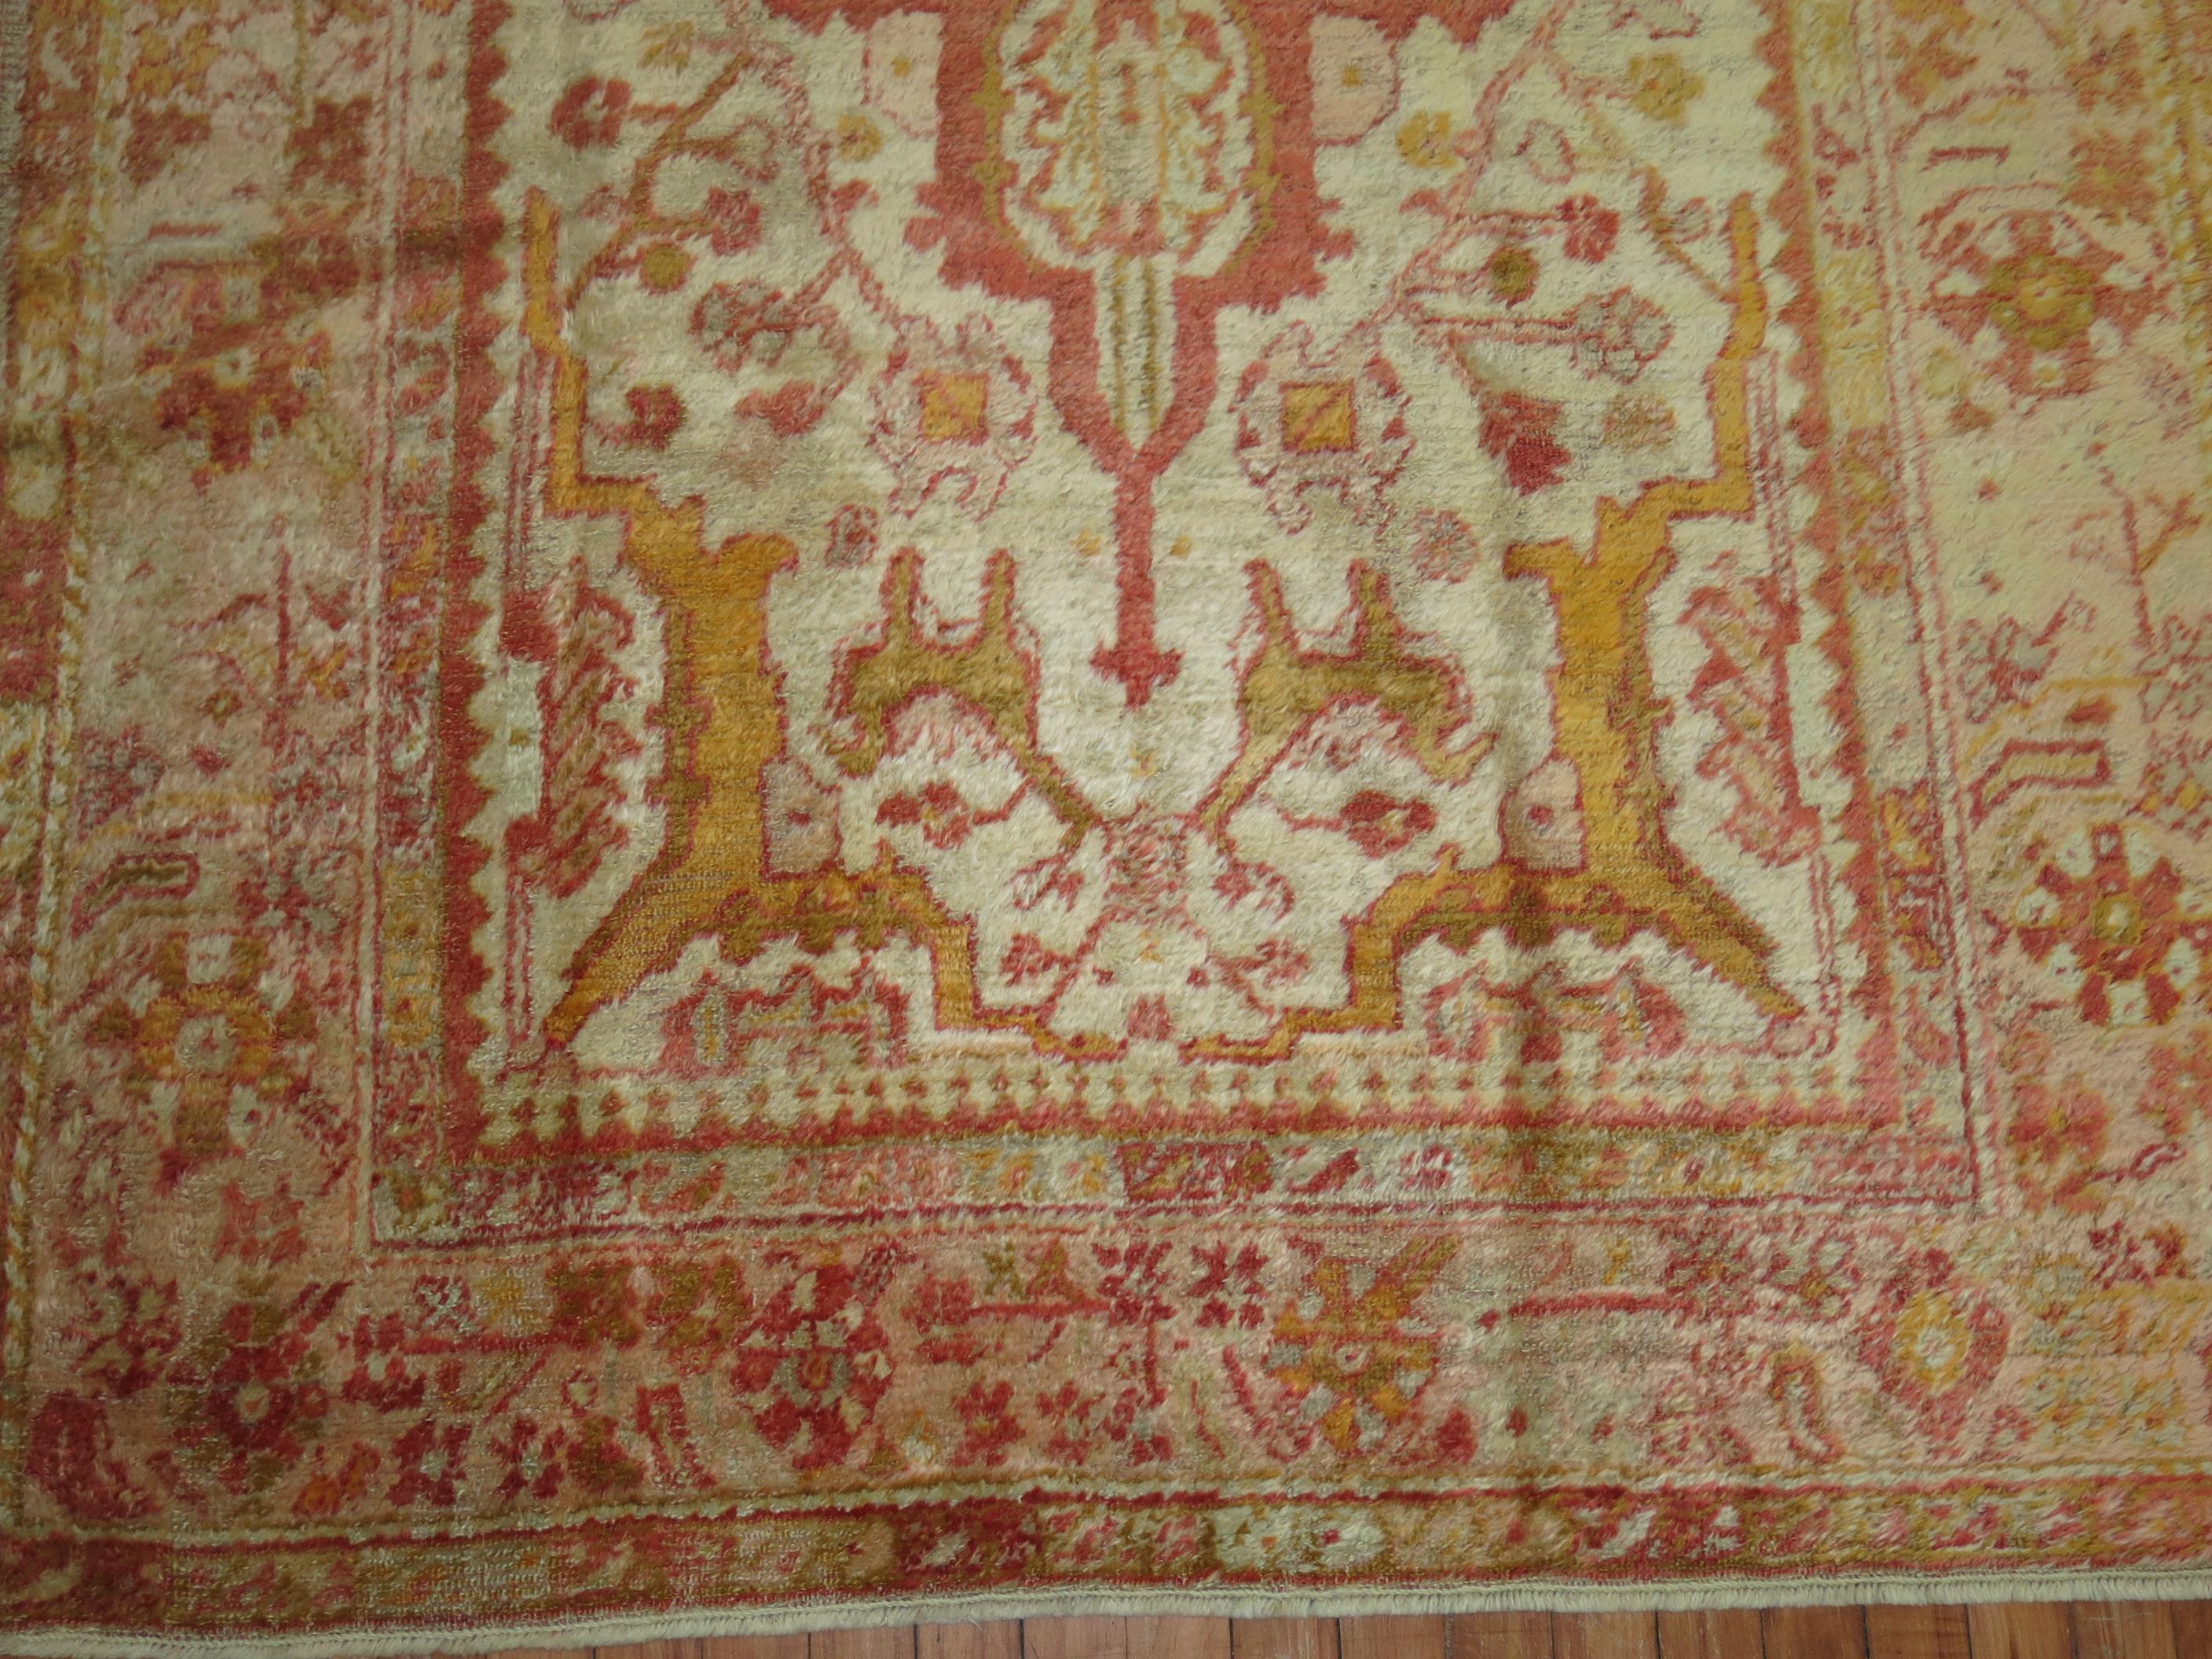 An early 20th century angora wool Oushak rug with a ivory colored field with other subtle warm accents. This is a genuine piece woven with angora goat wool and its an antique. There is no noticeable repairs or any condition issues at all.

4'8